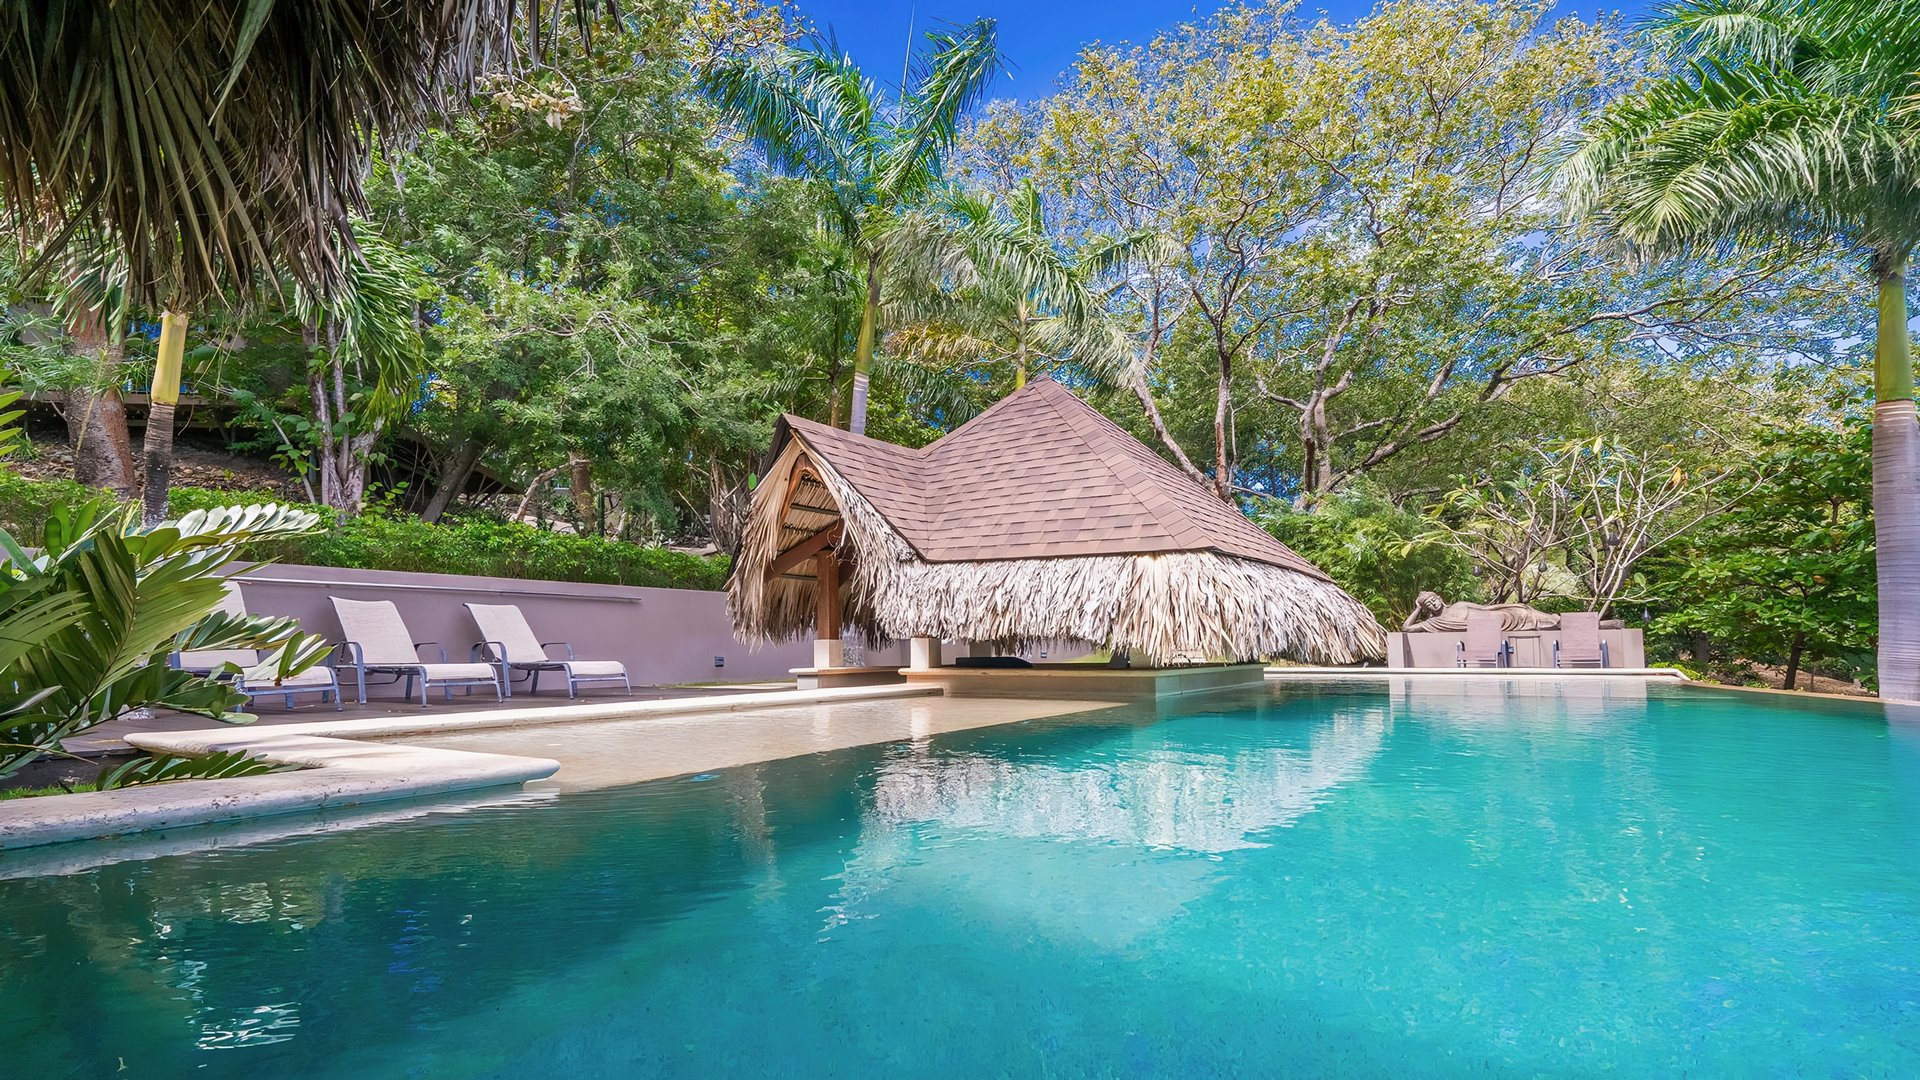 10664-The swimming pool of the six-bedroom home for sale in Guanacaste, Costa Rica